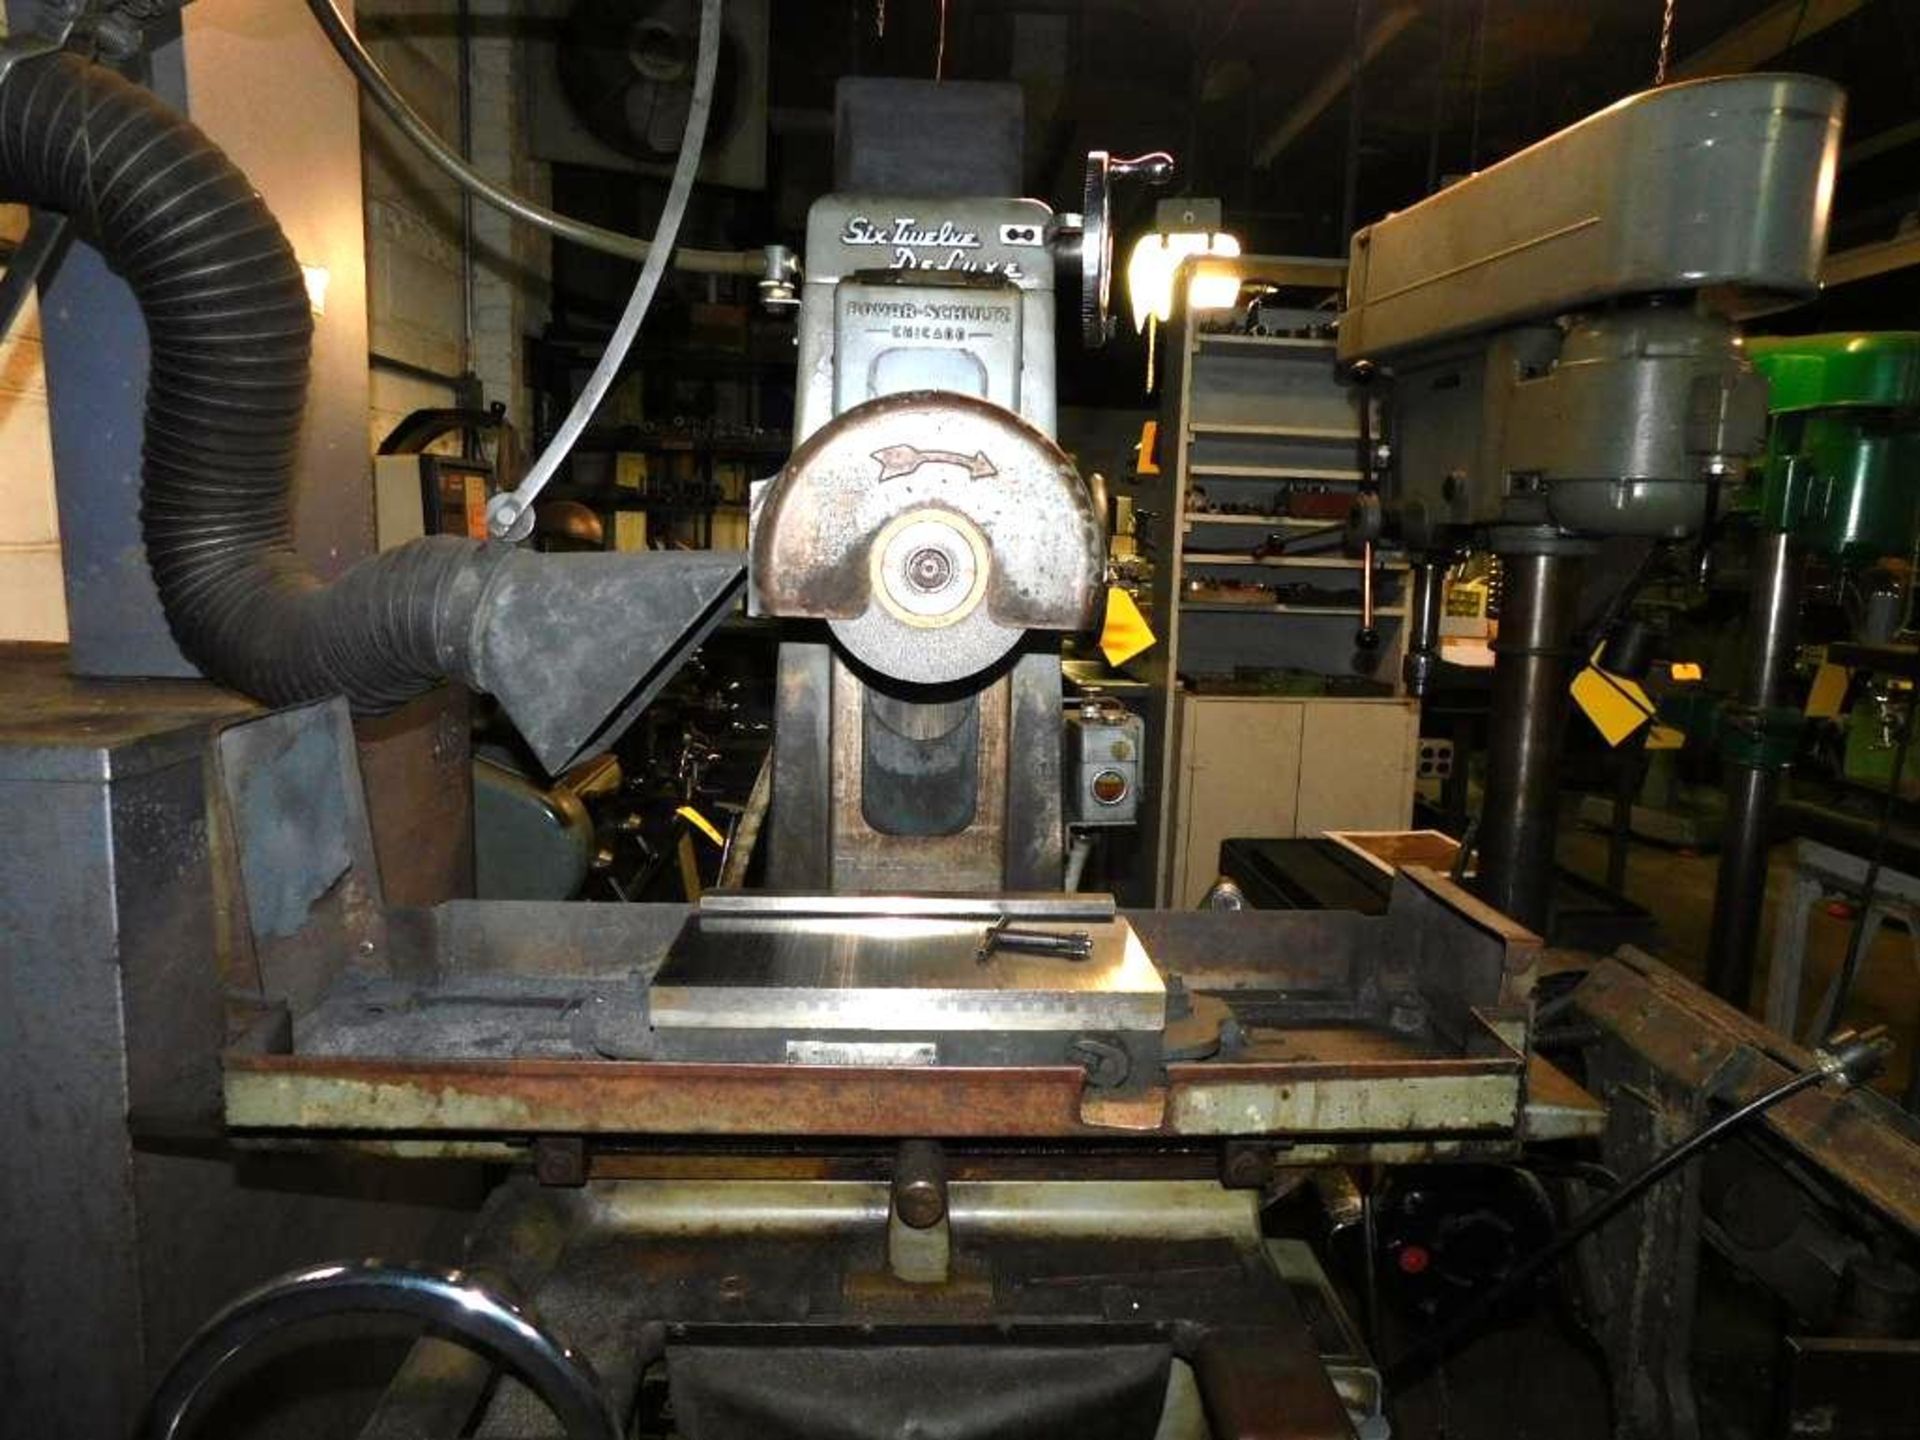 Boyar Schultz 612 Deluxe Surface Grinder w/12" x 6" Ceramax Magnetic Chuck, 1 HP - Image 3 of 10